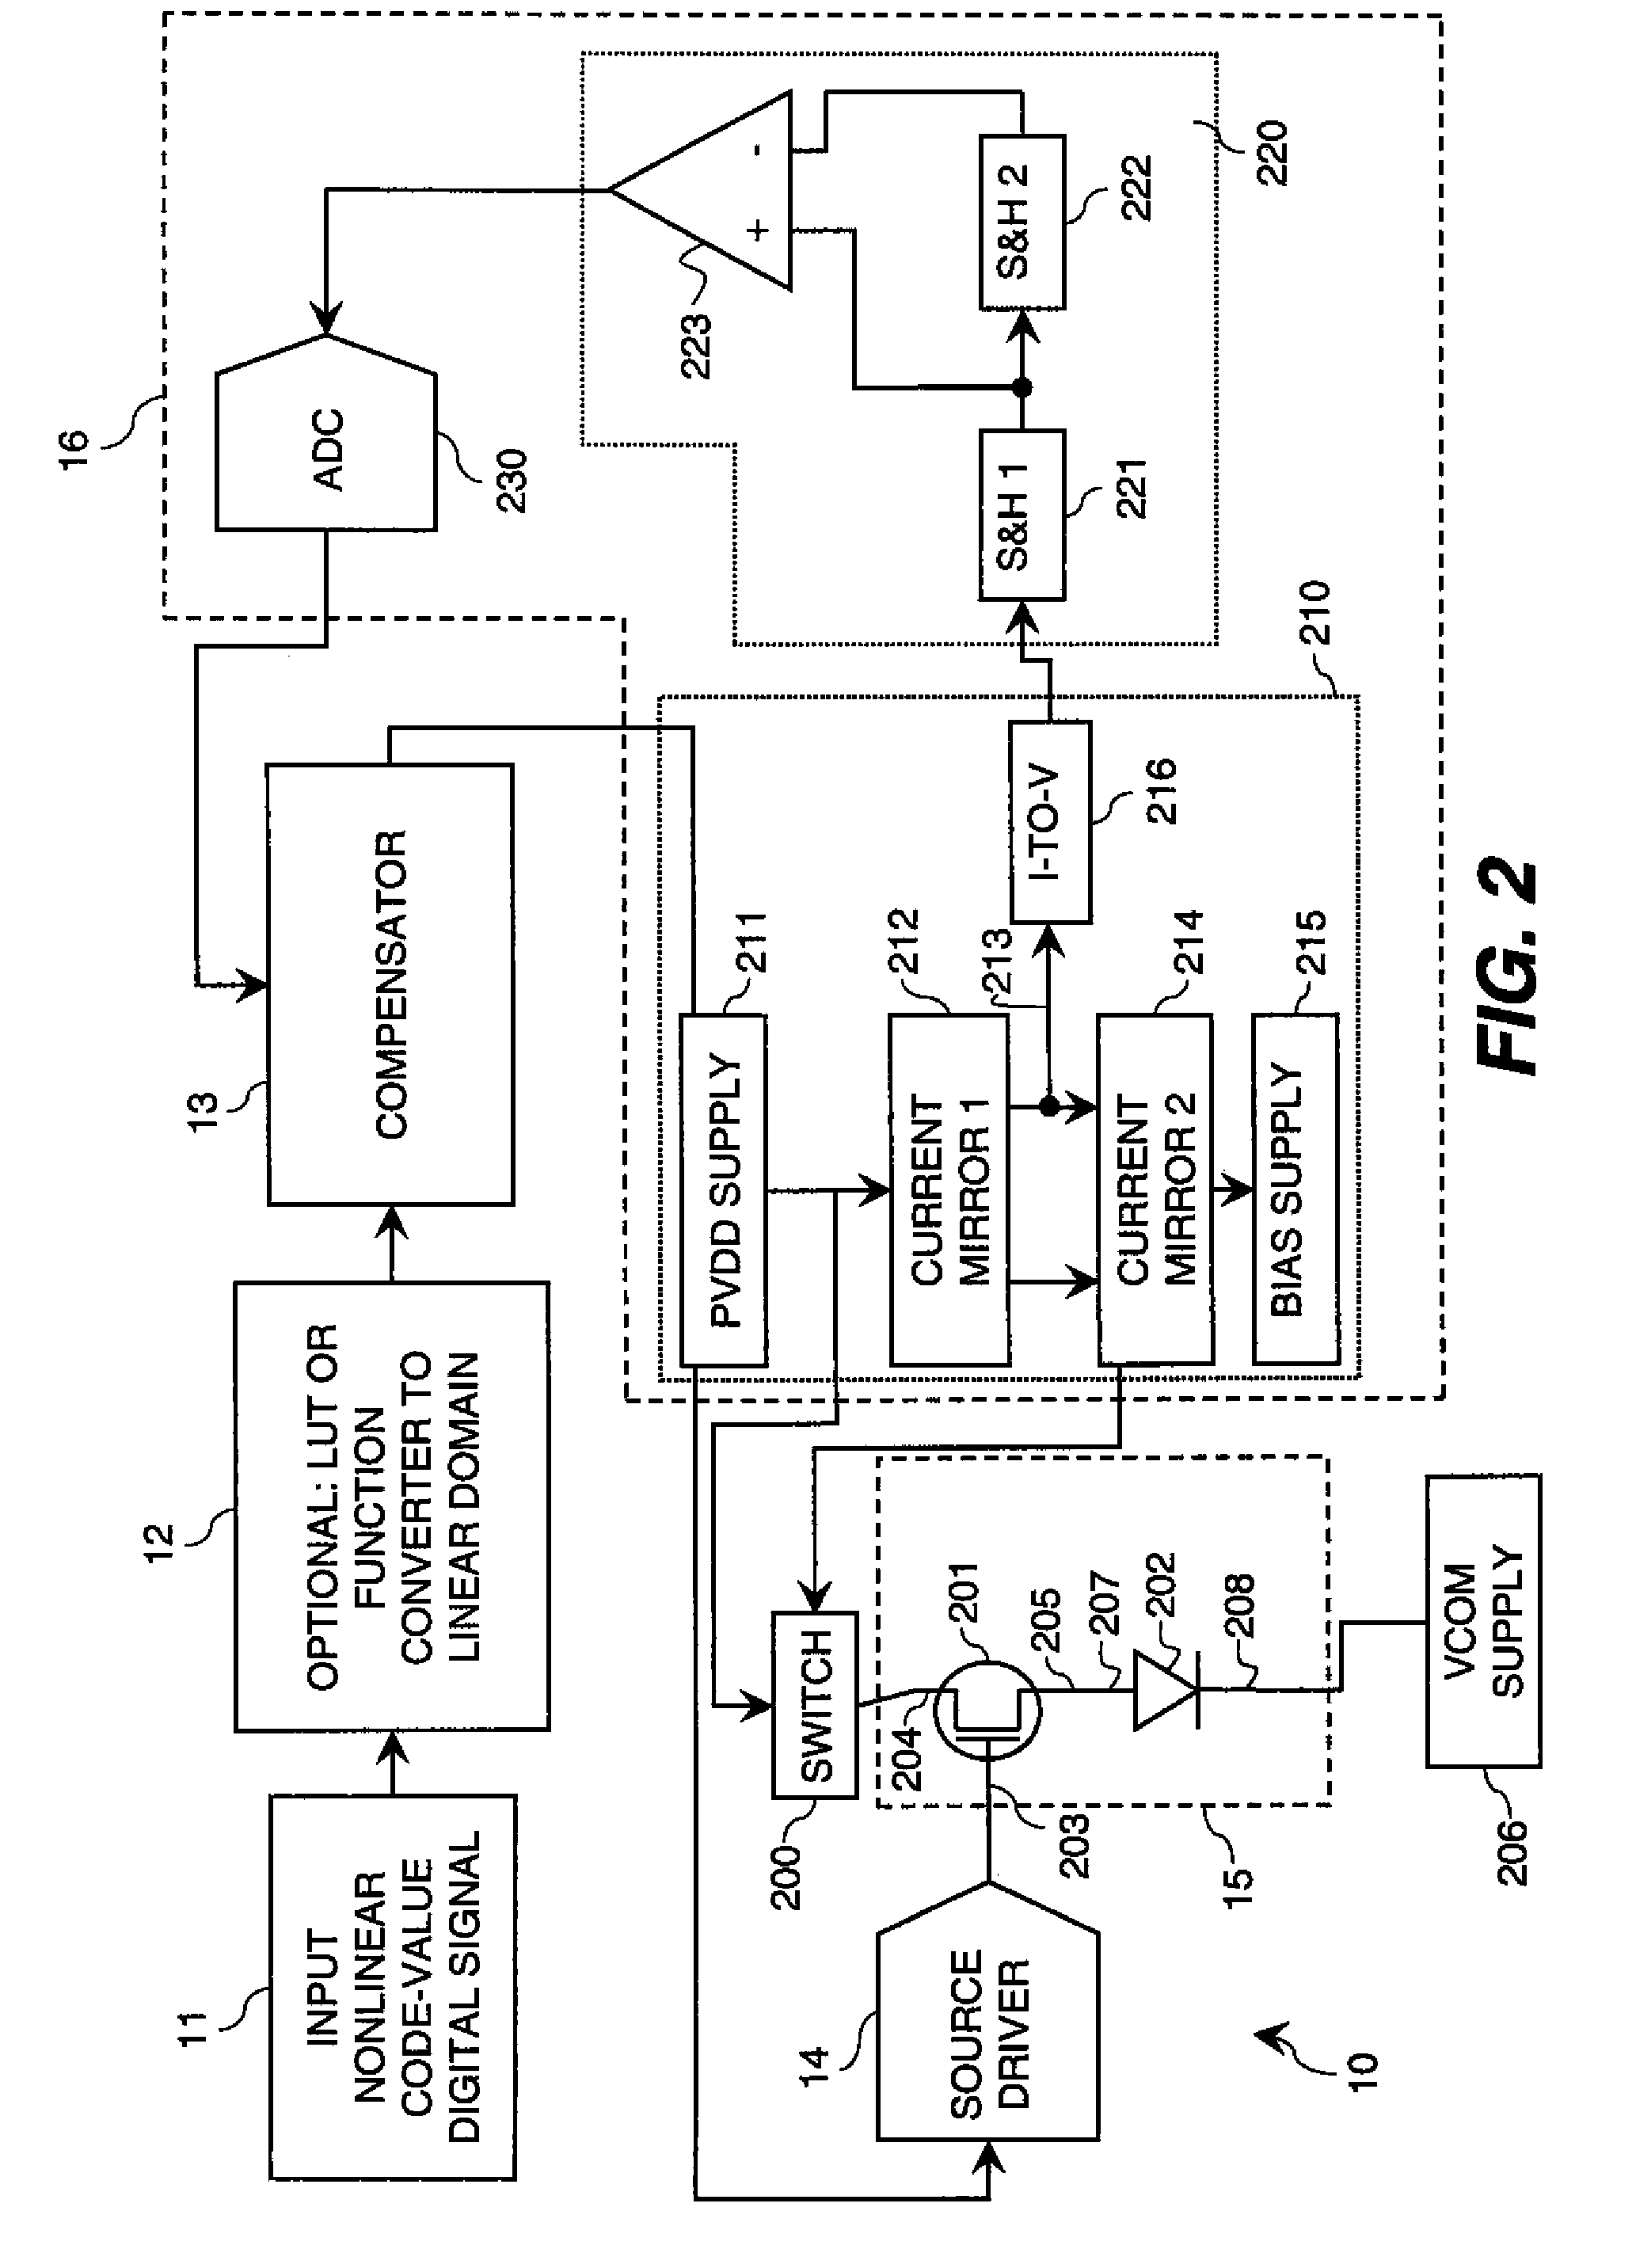 Electroluminescent display initial-nonuniformity-compensated drive signal